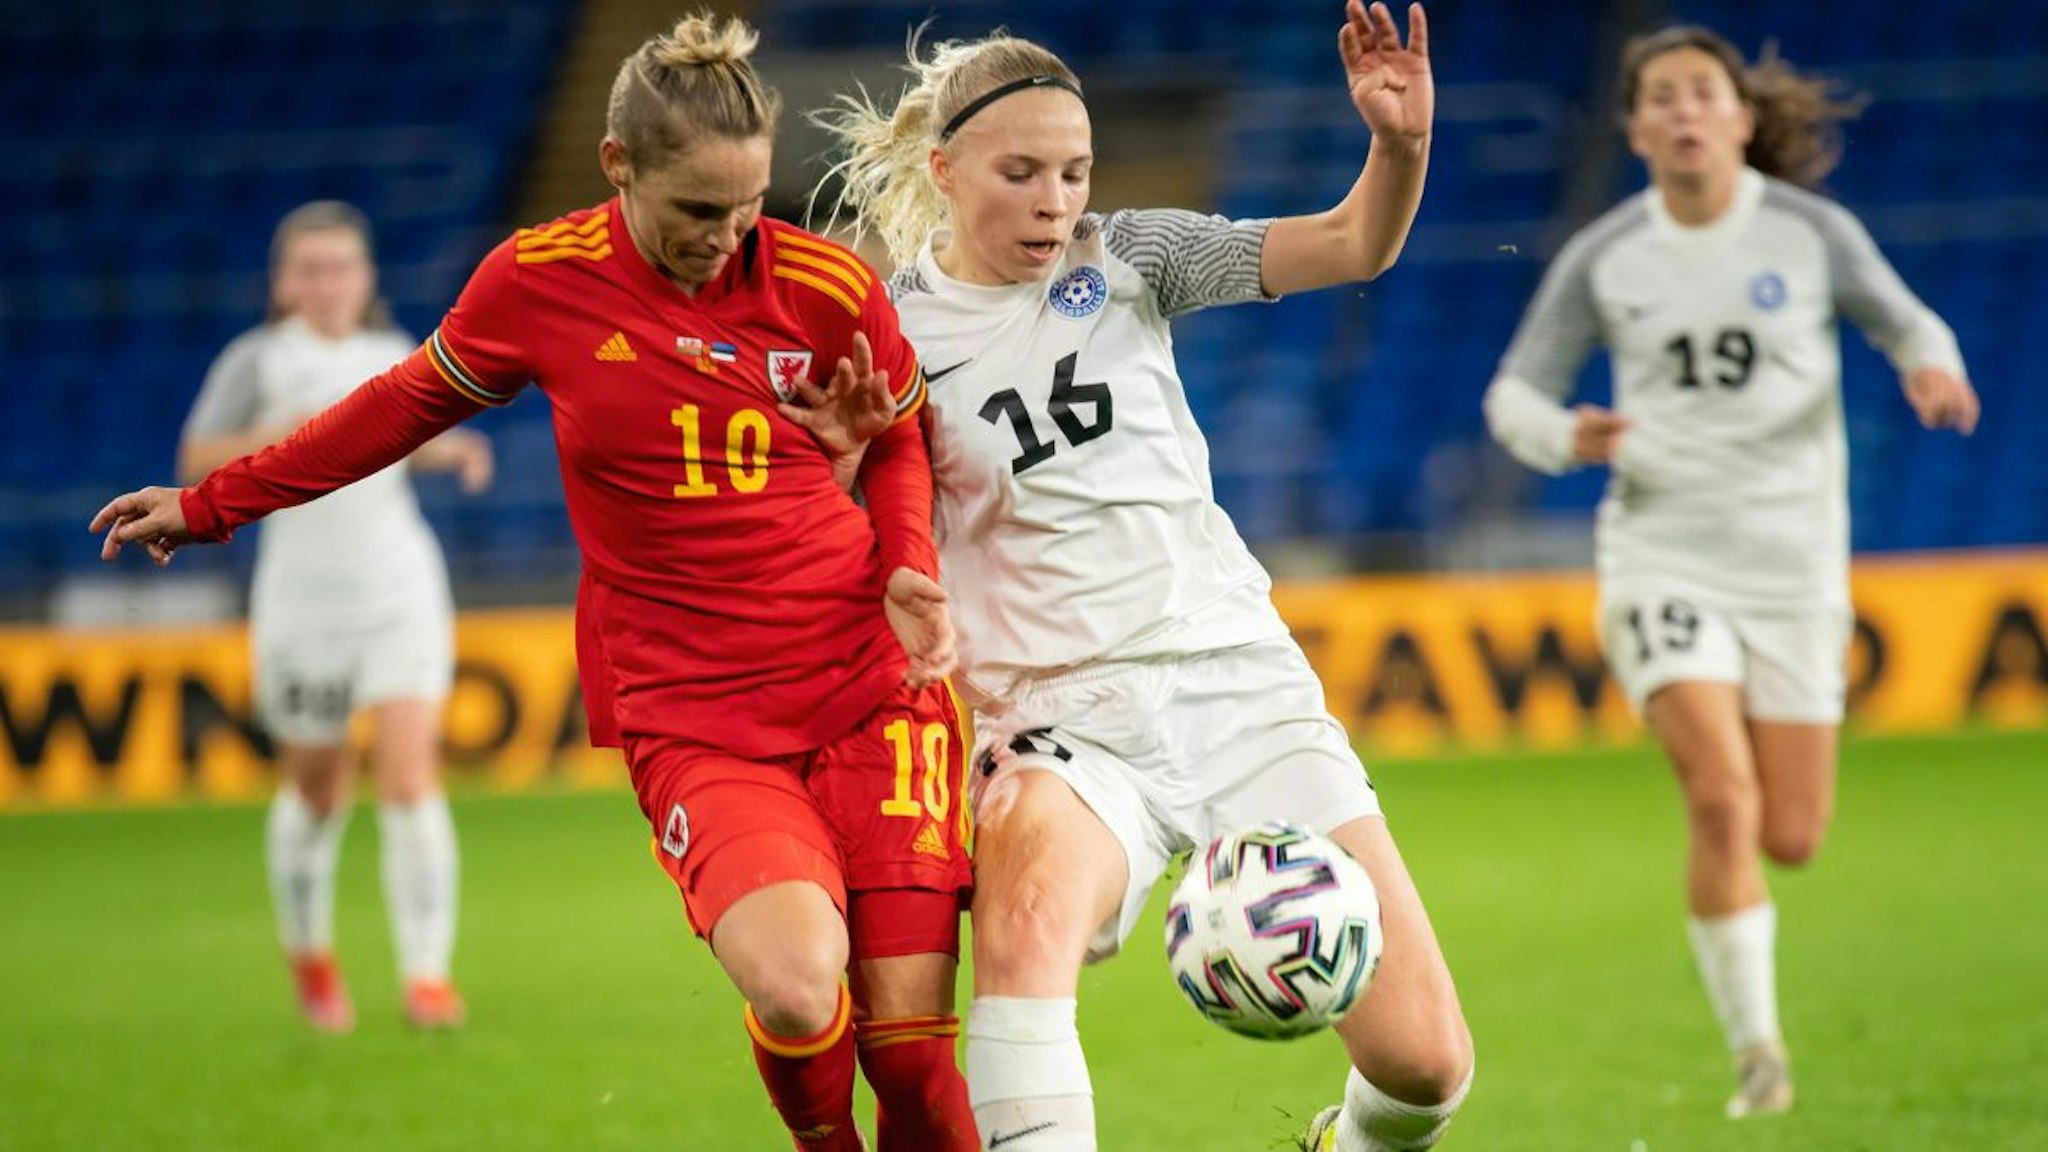 Jessica Fishlock (No.10) of Wales, and Sandra Liir (No.16) of Estonia in action during the FIFA Women's World Cup Qualifying match between Wales and Estonia at Cardiff City Stadium.